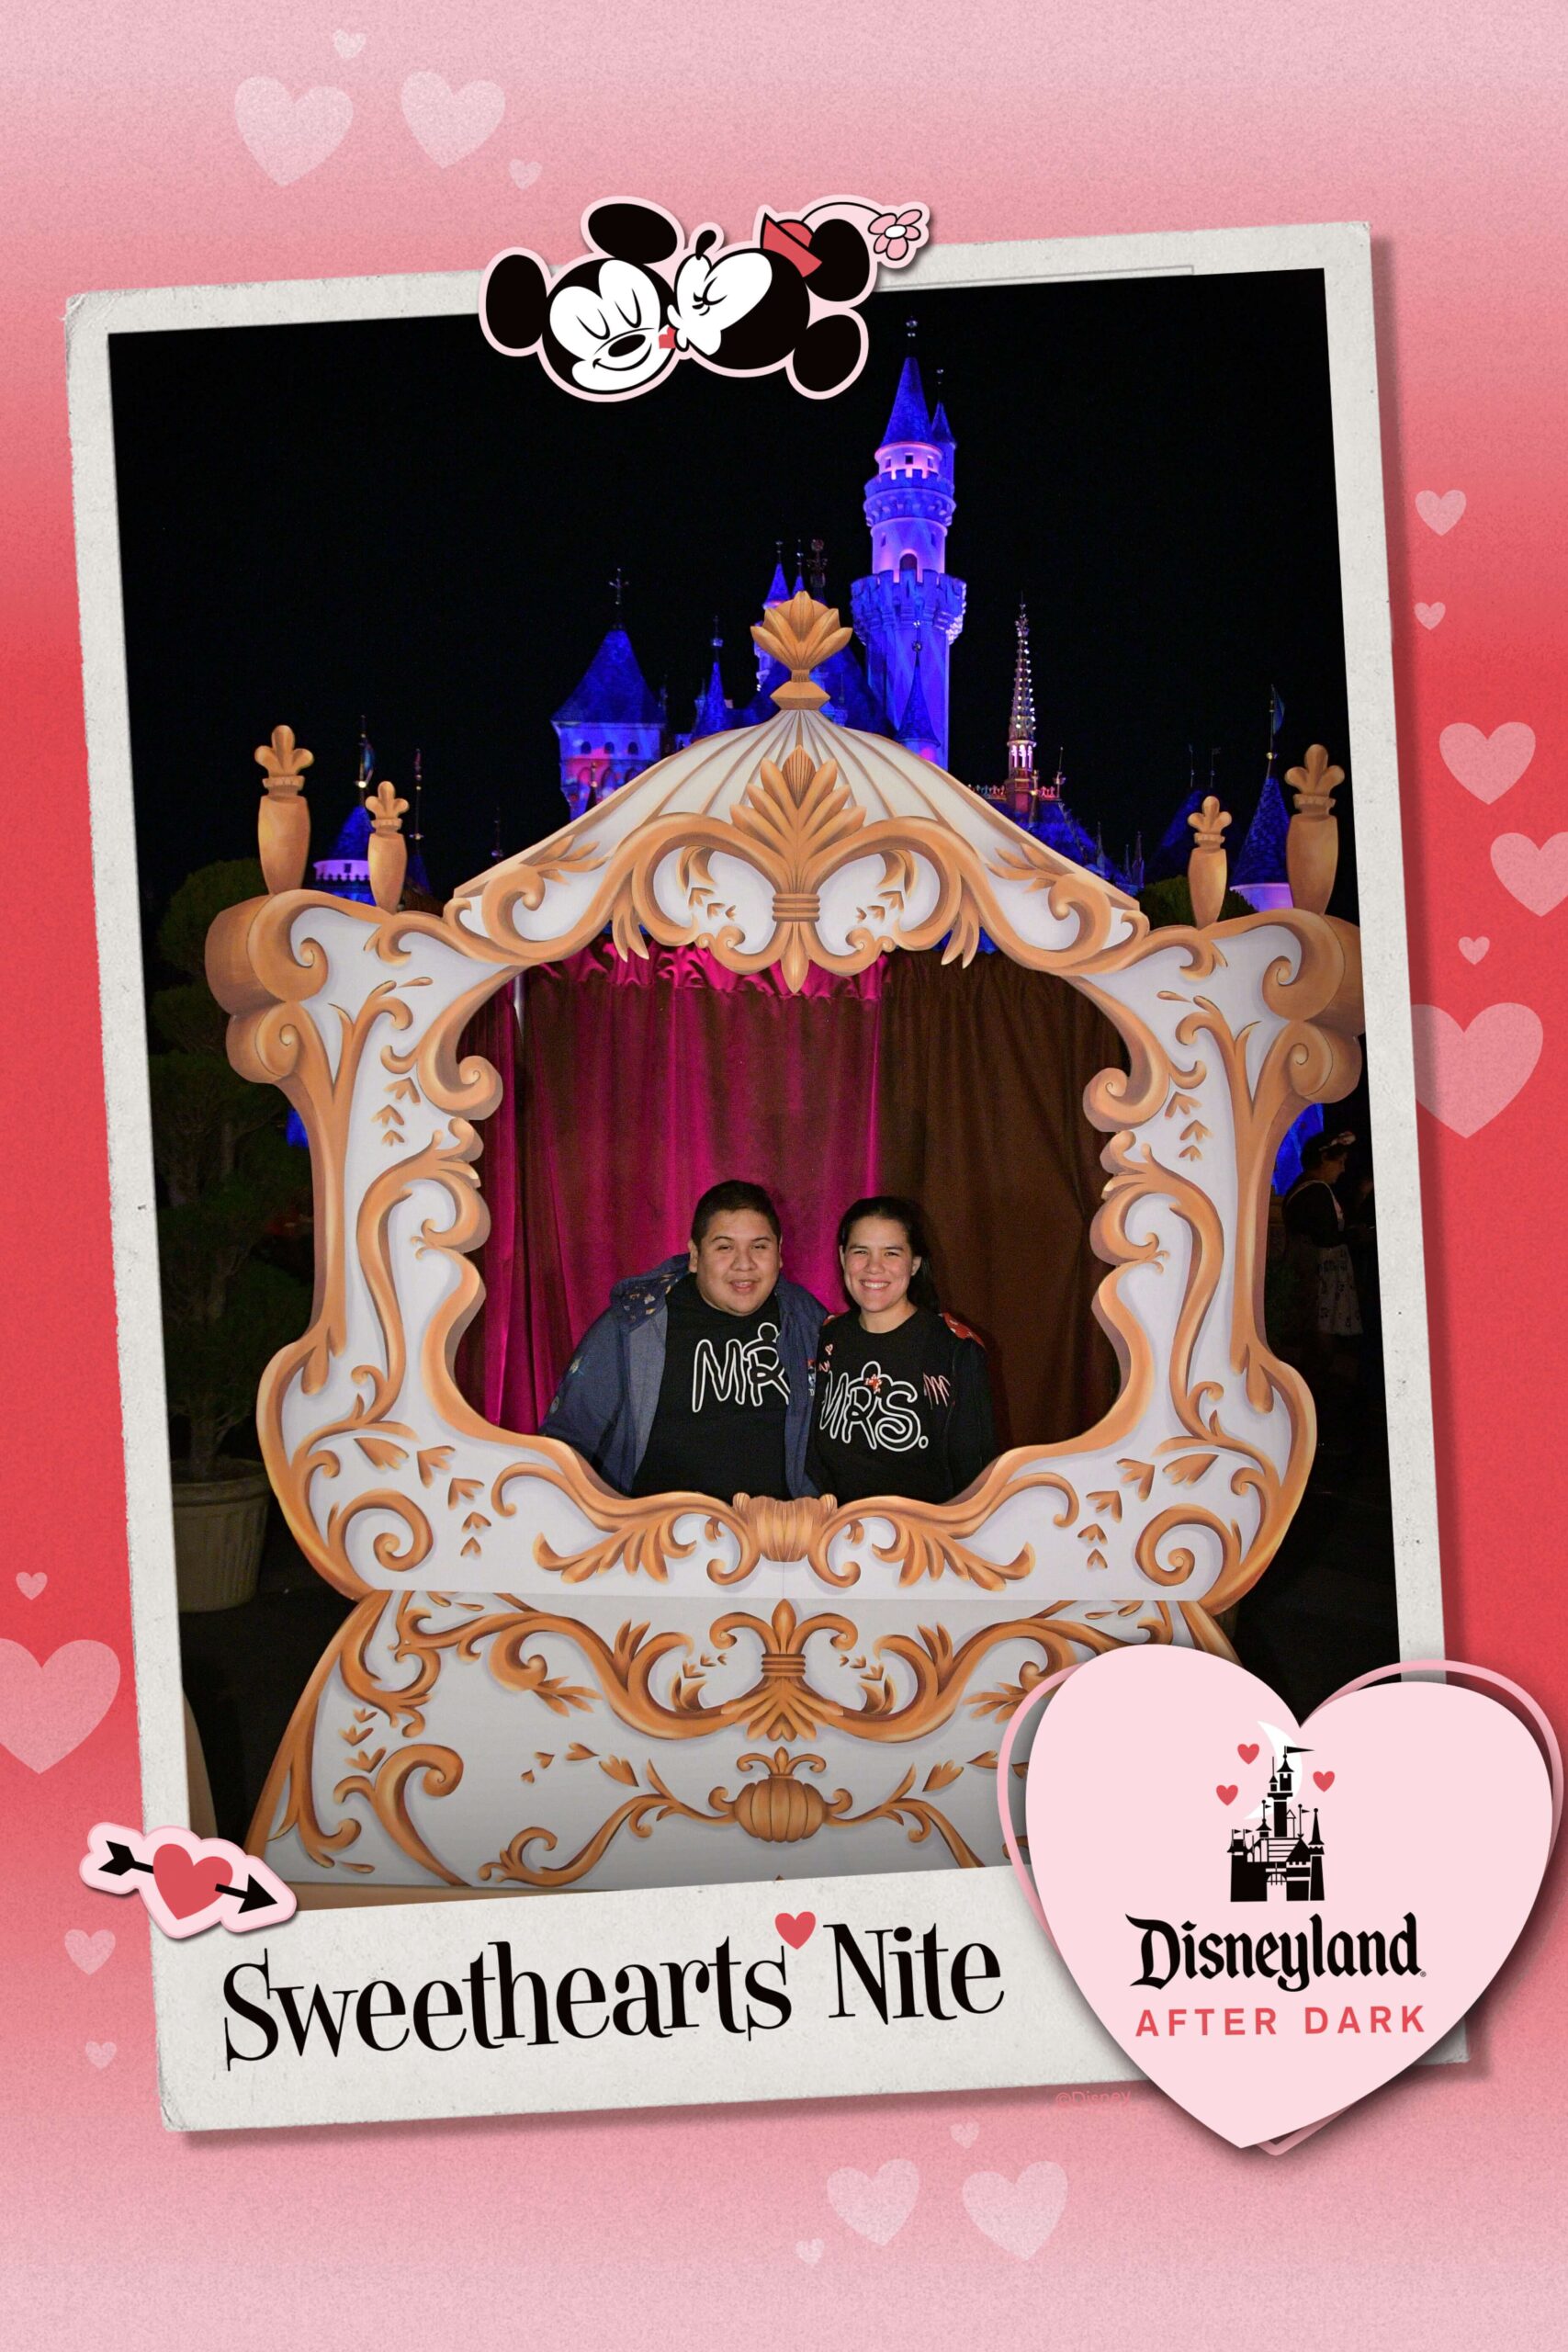 becky and husband sitting inside a cinderella coach cutout with sweethearts nite disneyland after dark decorative frame around the picture